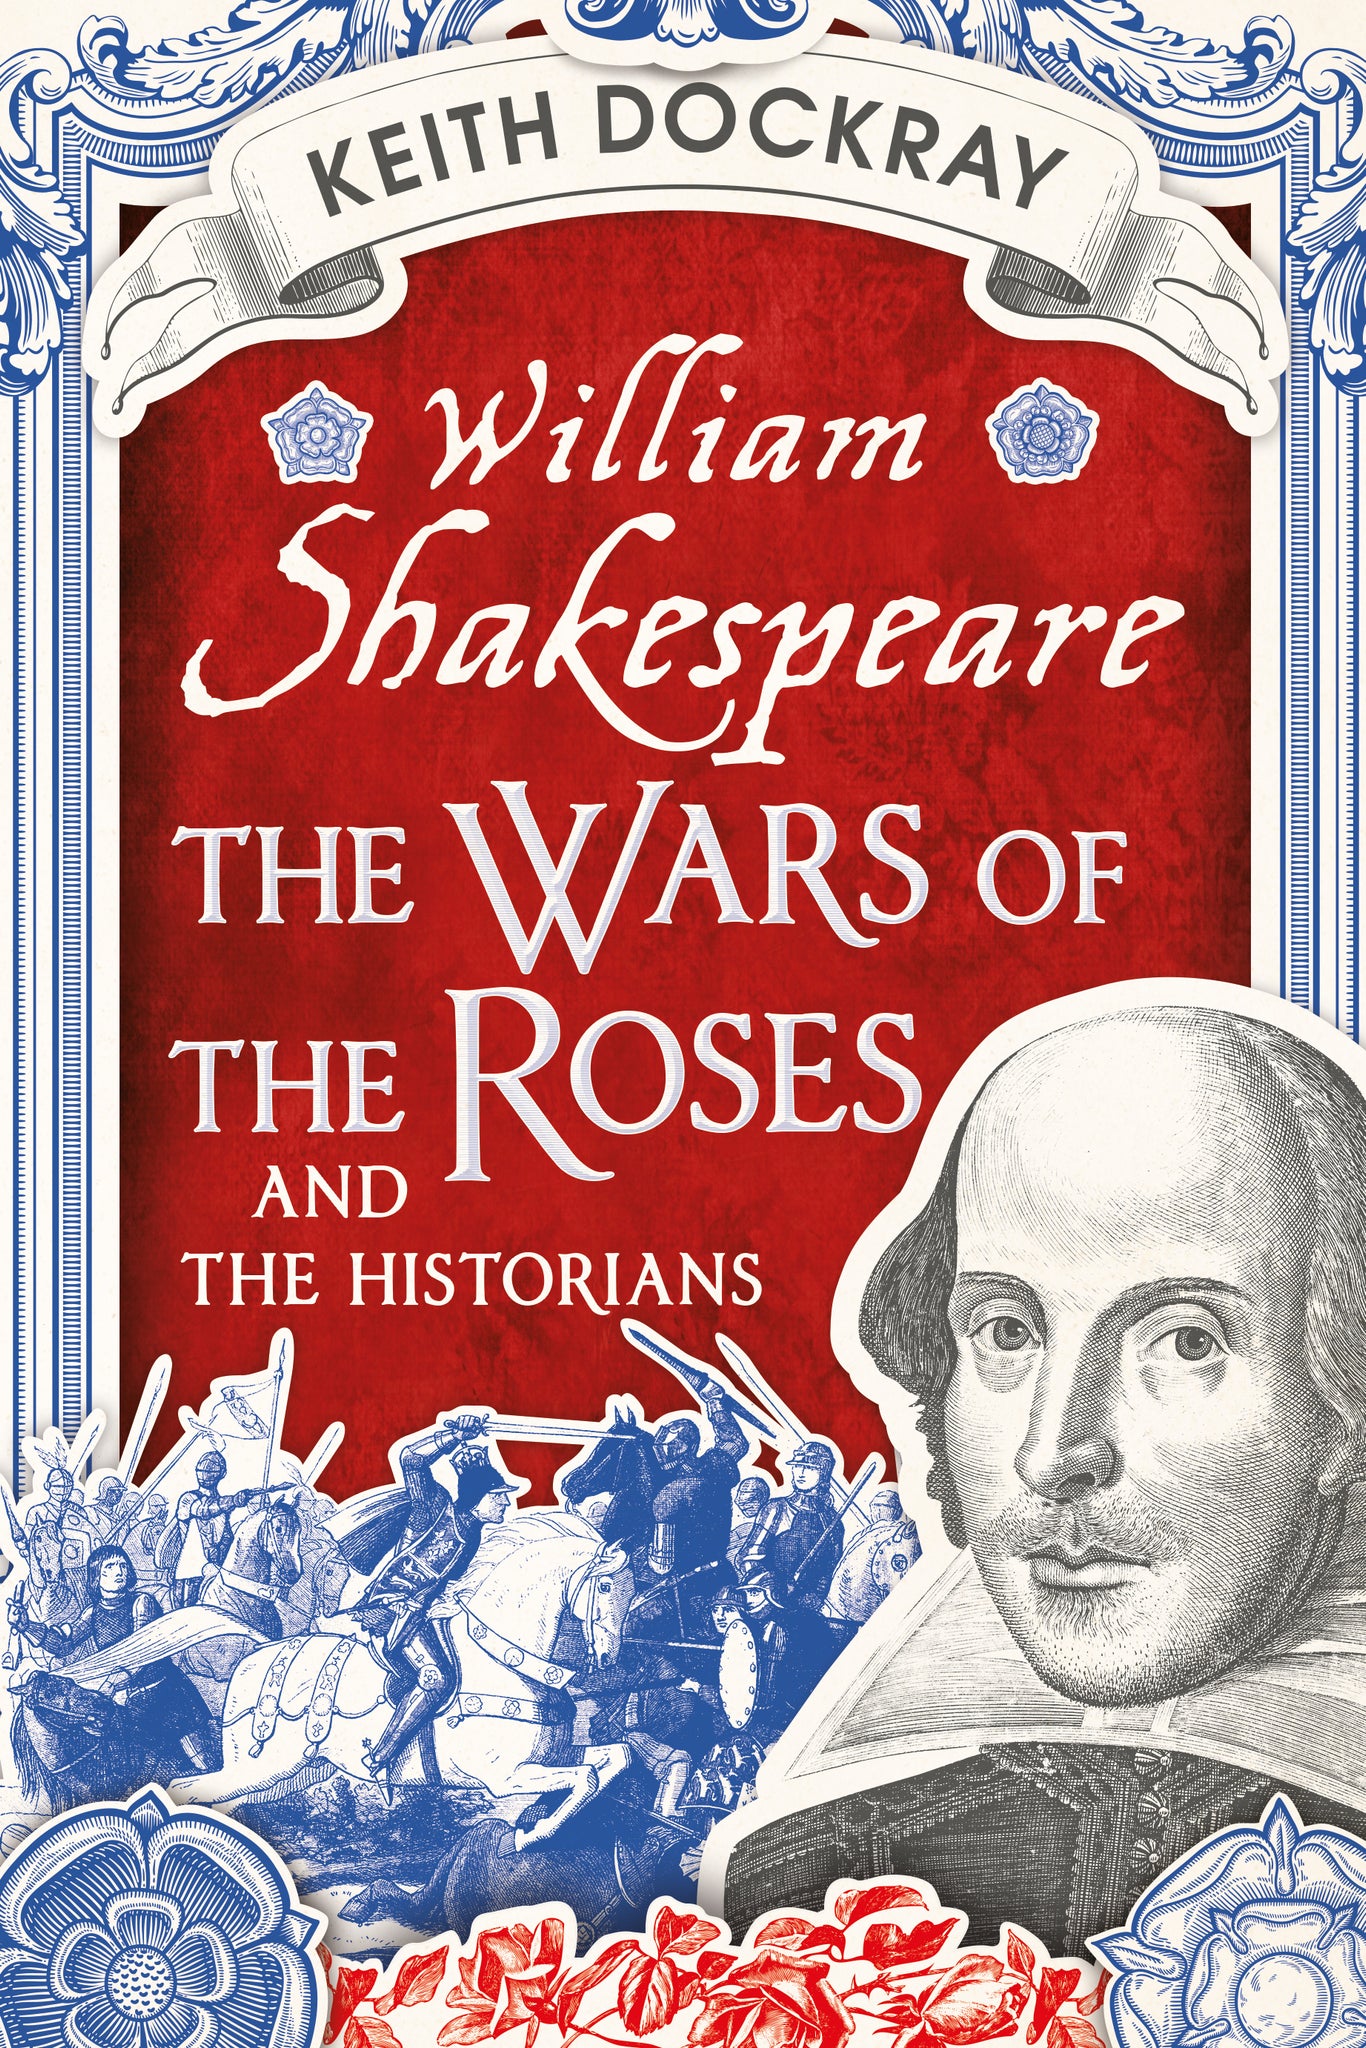 William Shakespeare, the Wars of the Roses and the Historians